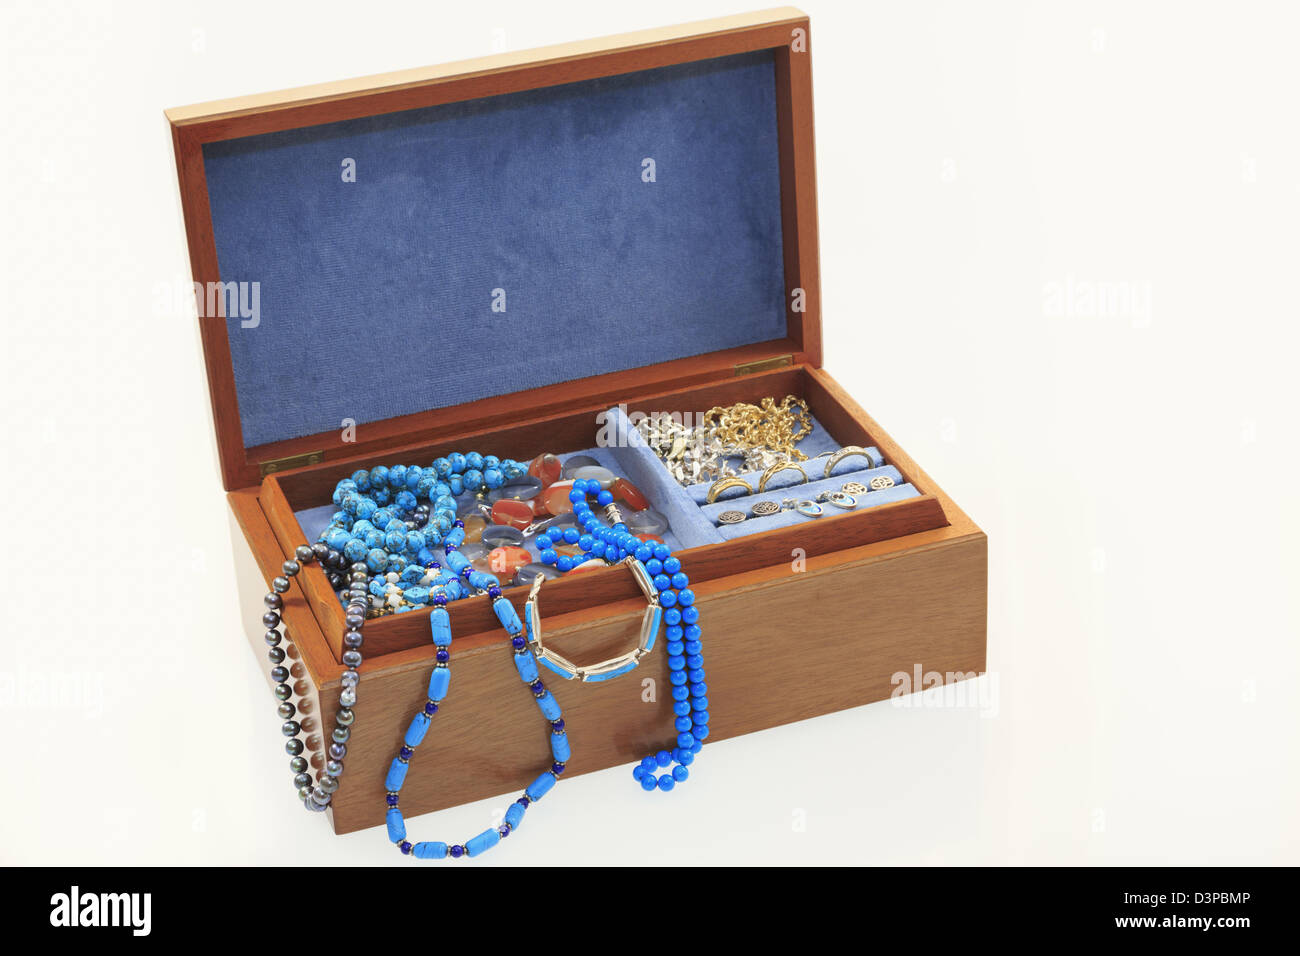 Blue velvet lined wooden jewellery box with lid open containing jewels and trinkets isolated on a plain white background. Stock Photo